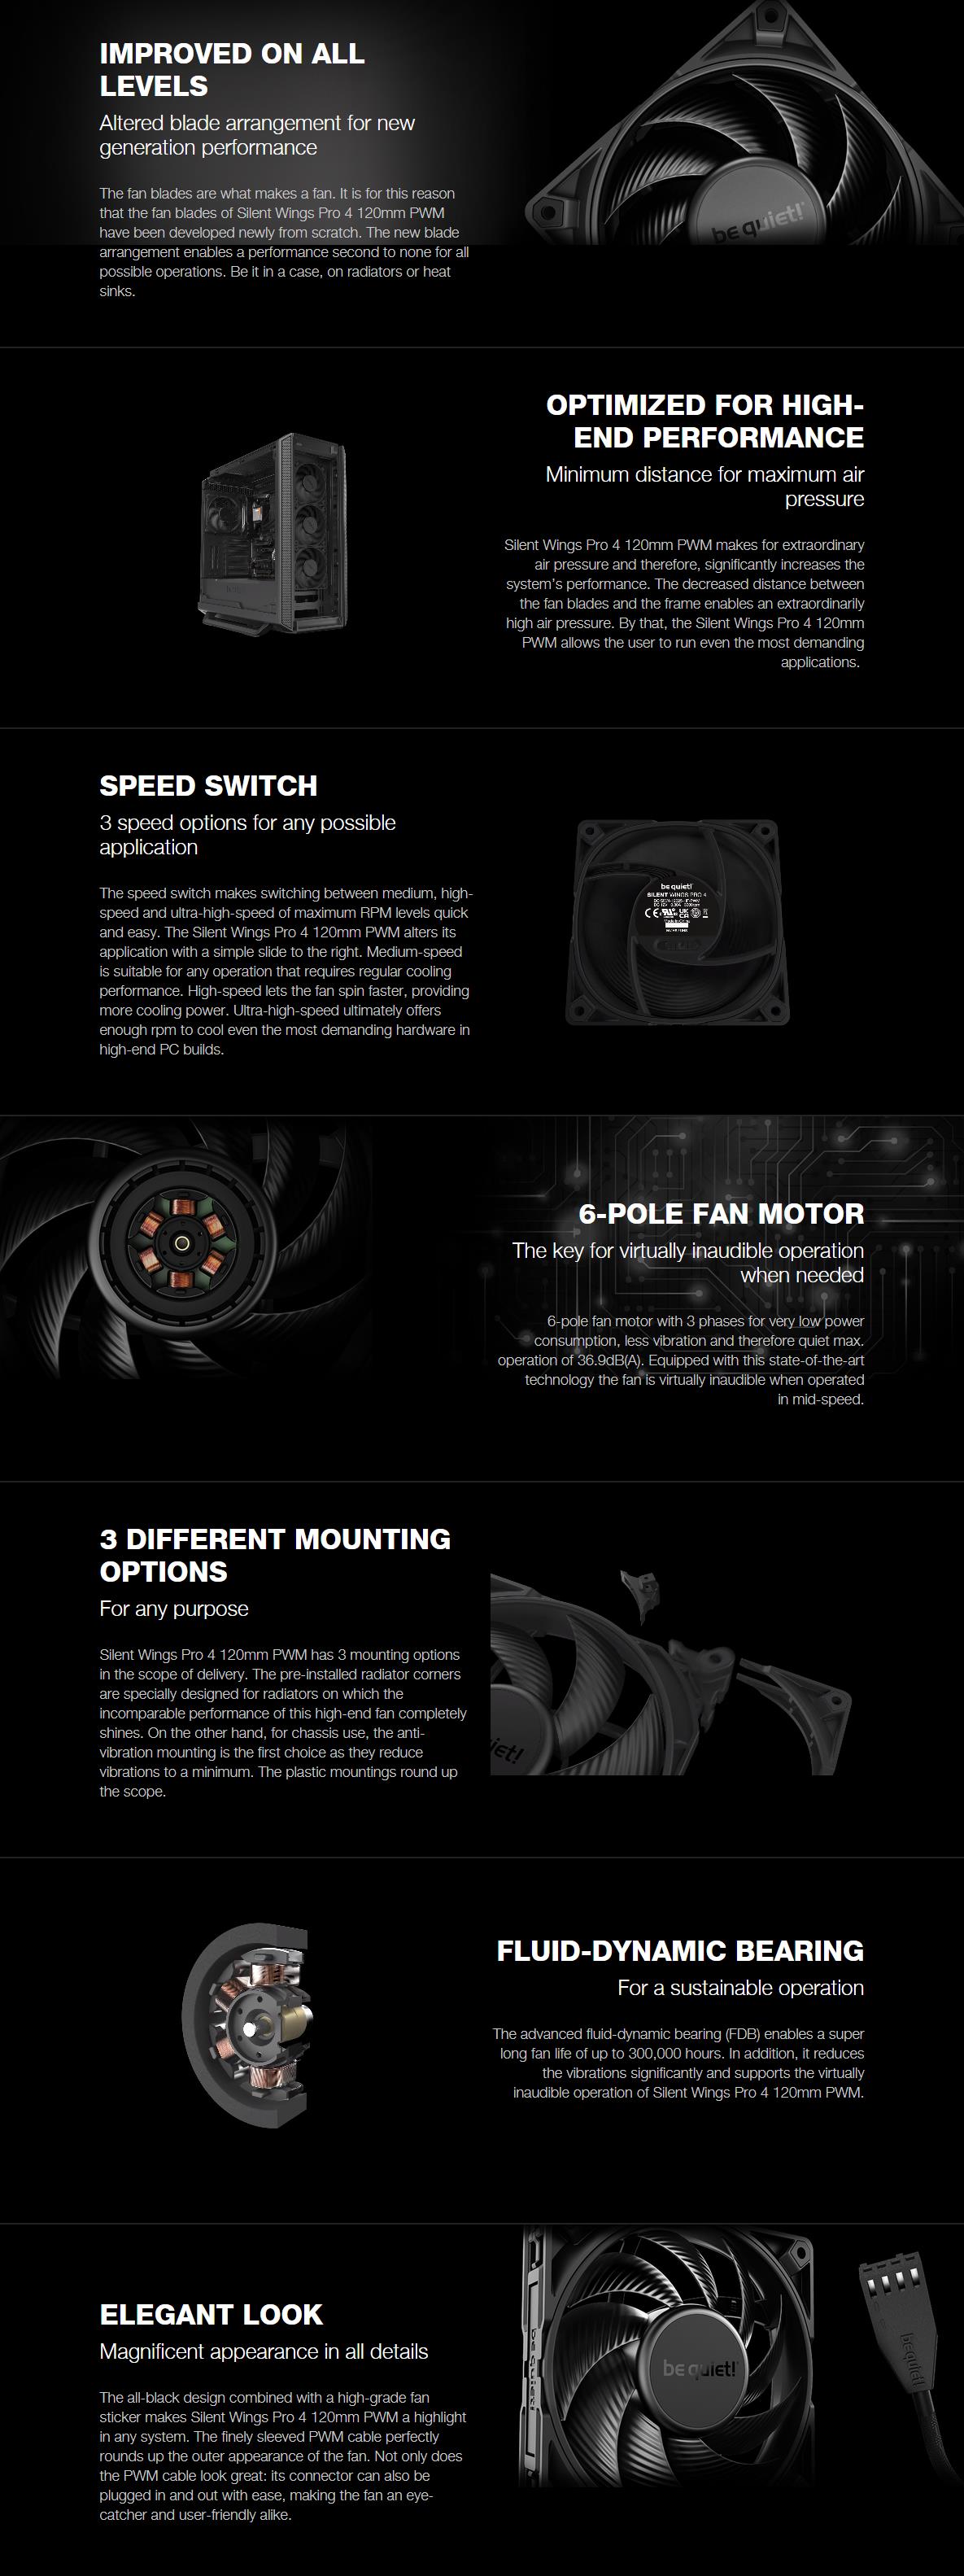 A large marketing image providing additional information about the product be quiet! SILENT WINGS PRO 4 120mm PWM Fan - Additional alt info not provided